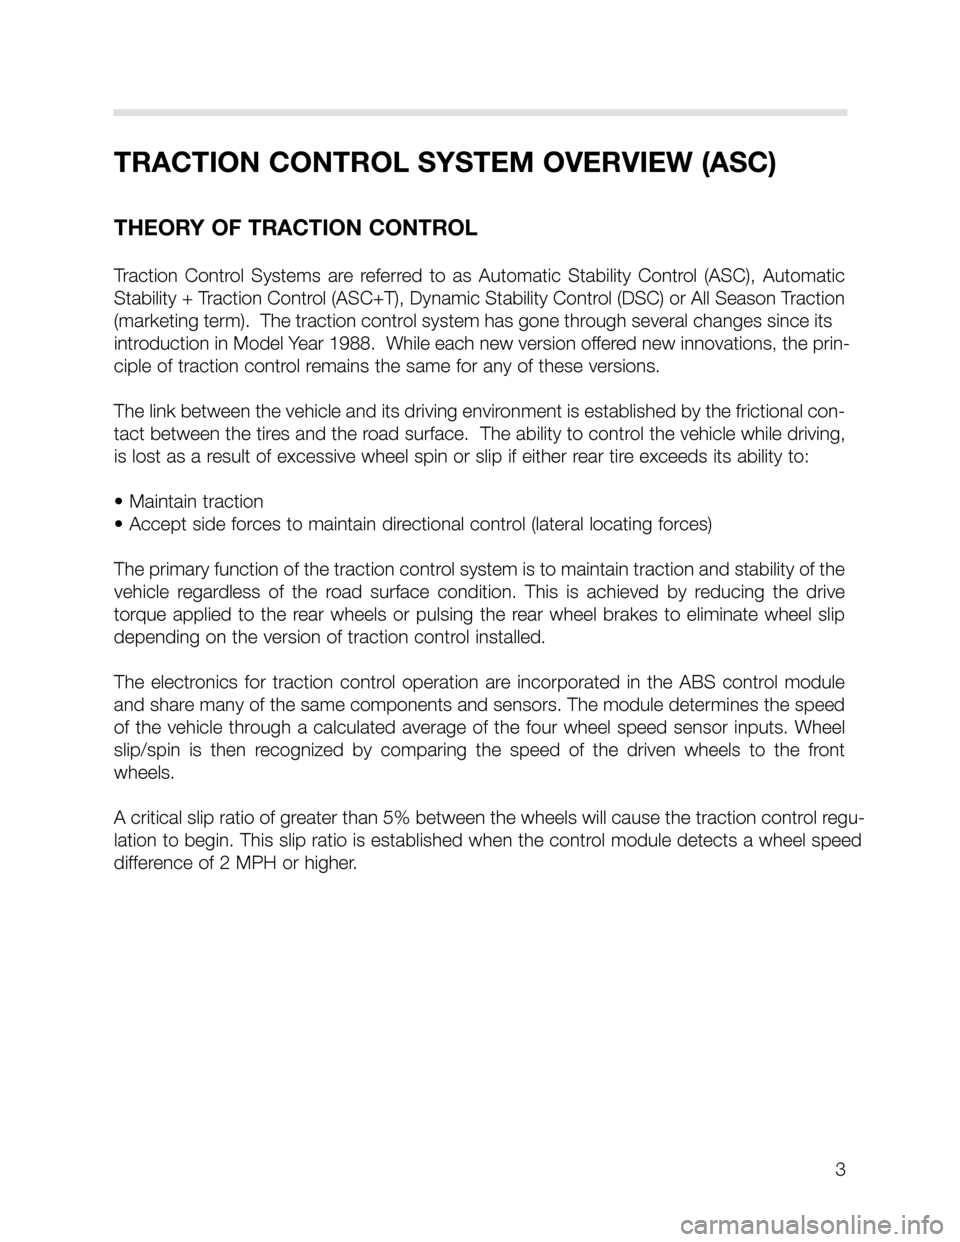 BMW X5 1999 E53 DSC System Workshop Manual 3
TRACTION CONTROL SYSTEM OVERVIEW (ASC)
THEORY OF TRACTION CONTROL
Traction  Control  Systems  are  referred  to  as  Automatic  Stability  Control  (ASC),  Automatic
Stability + Traction Control (AS